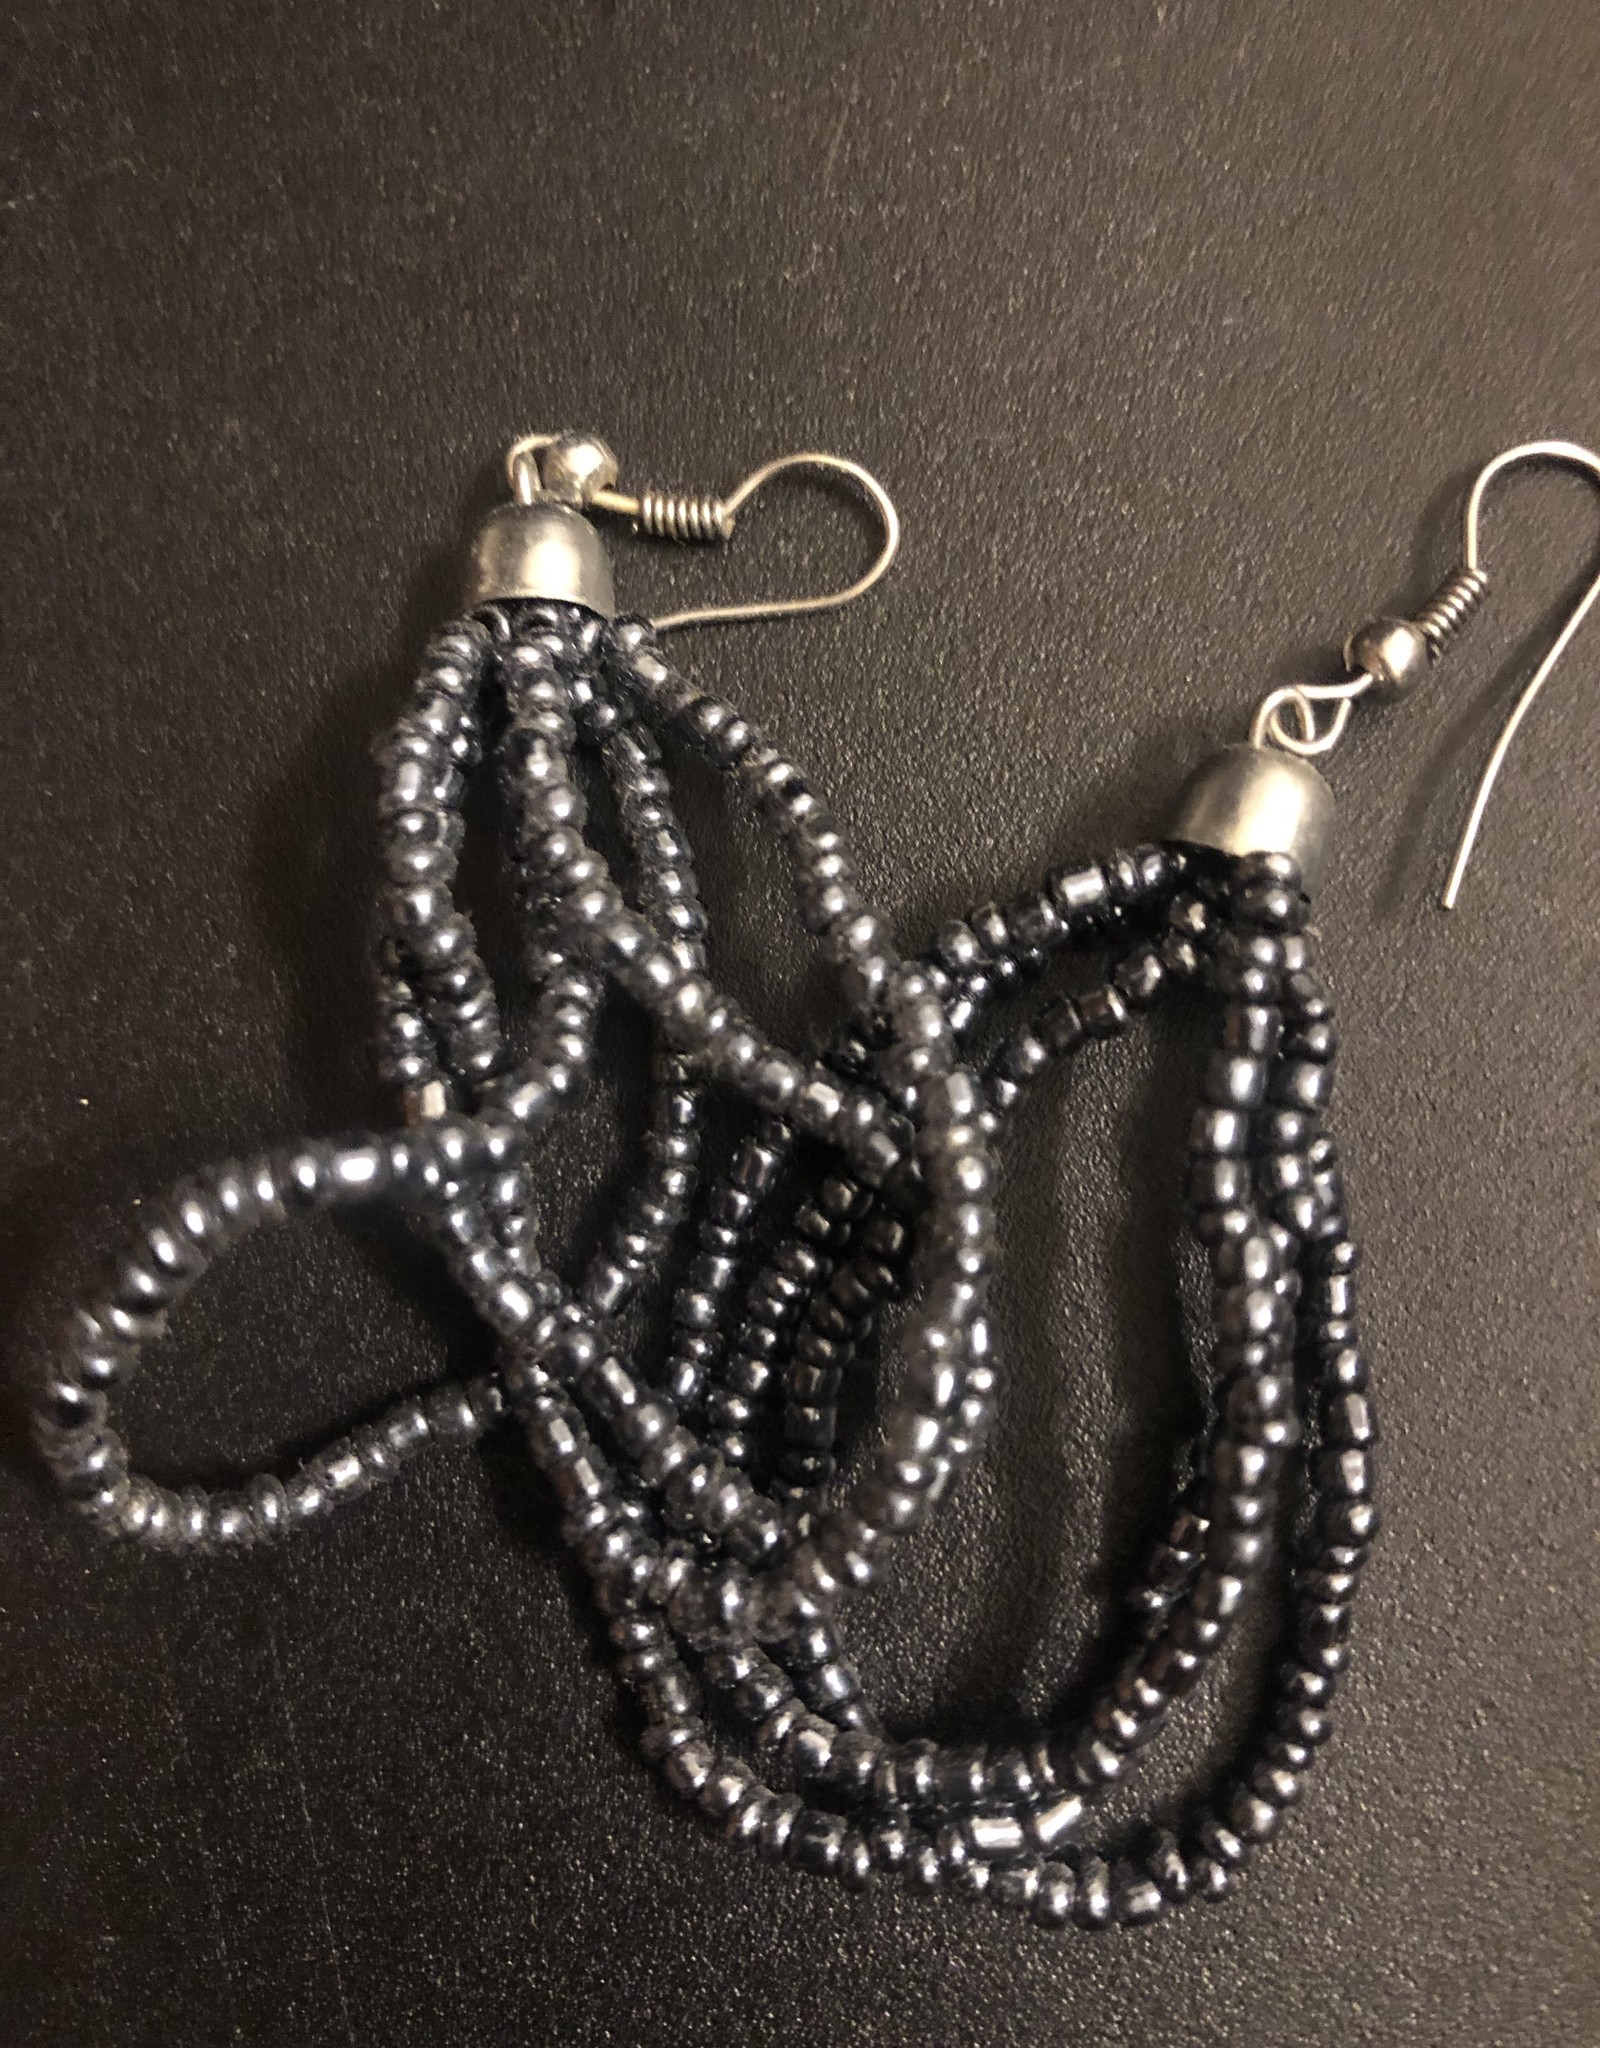 Silver beaded earrings - 2 inches